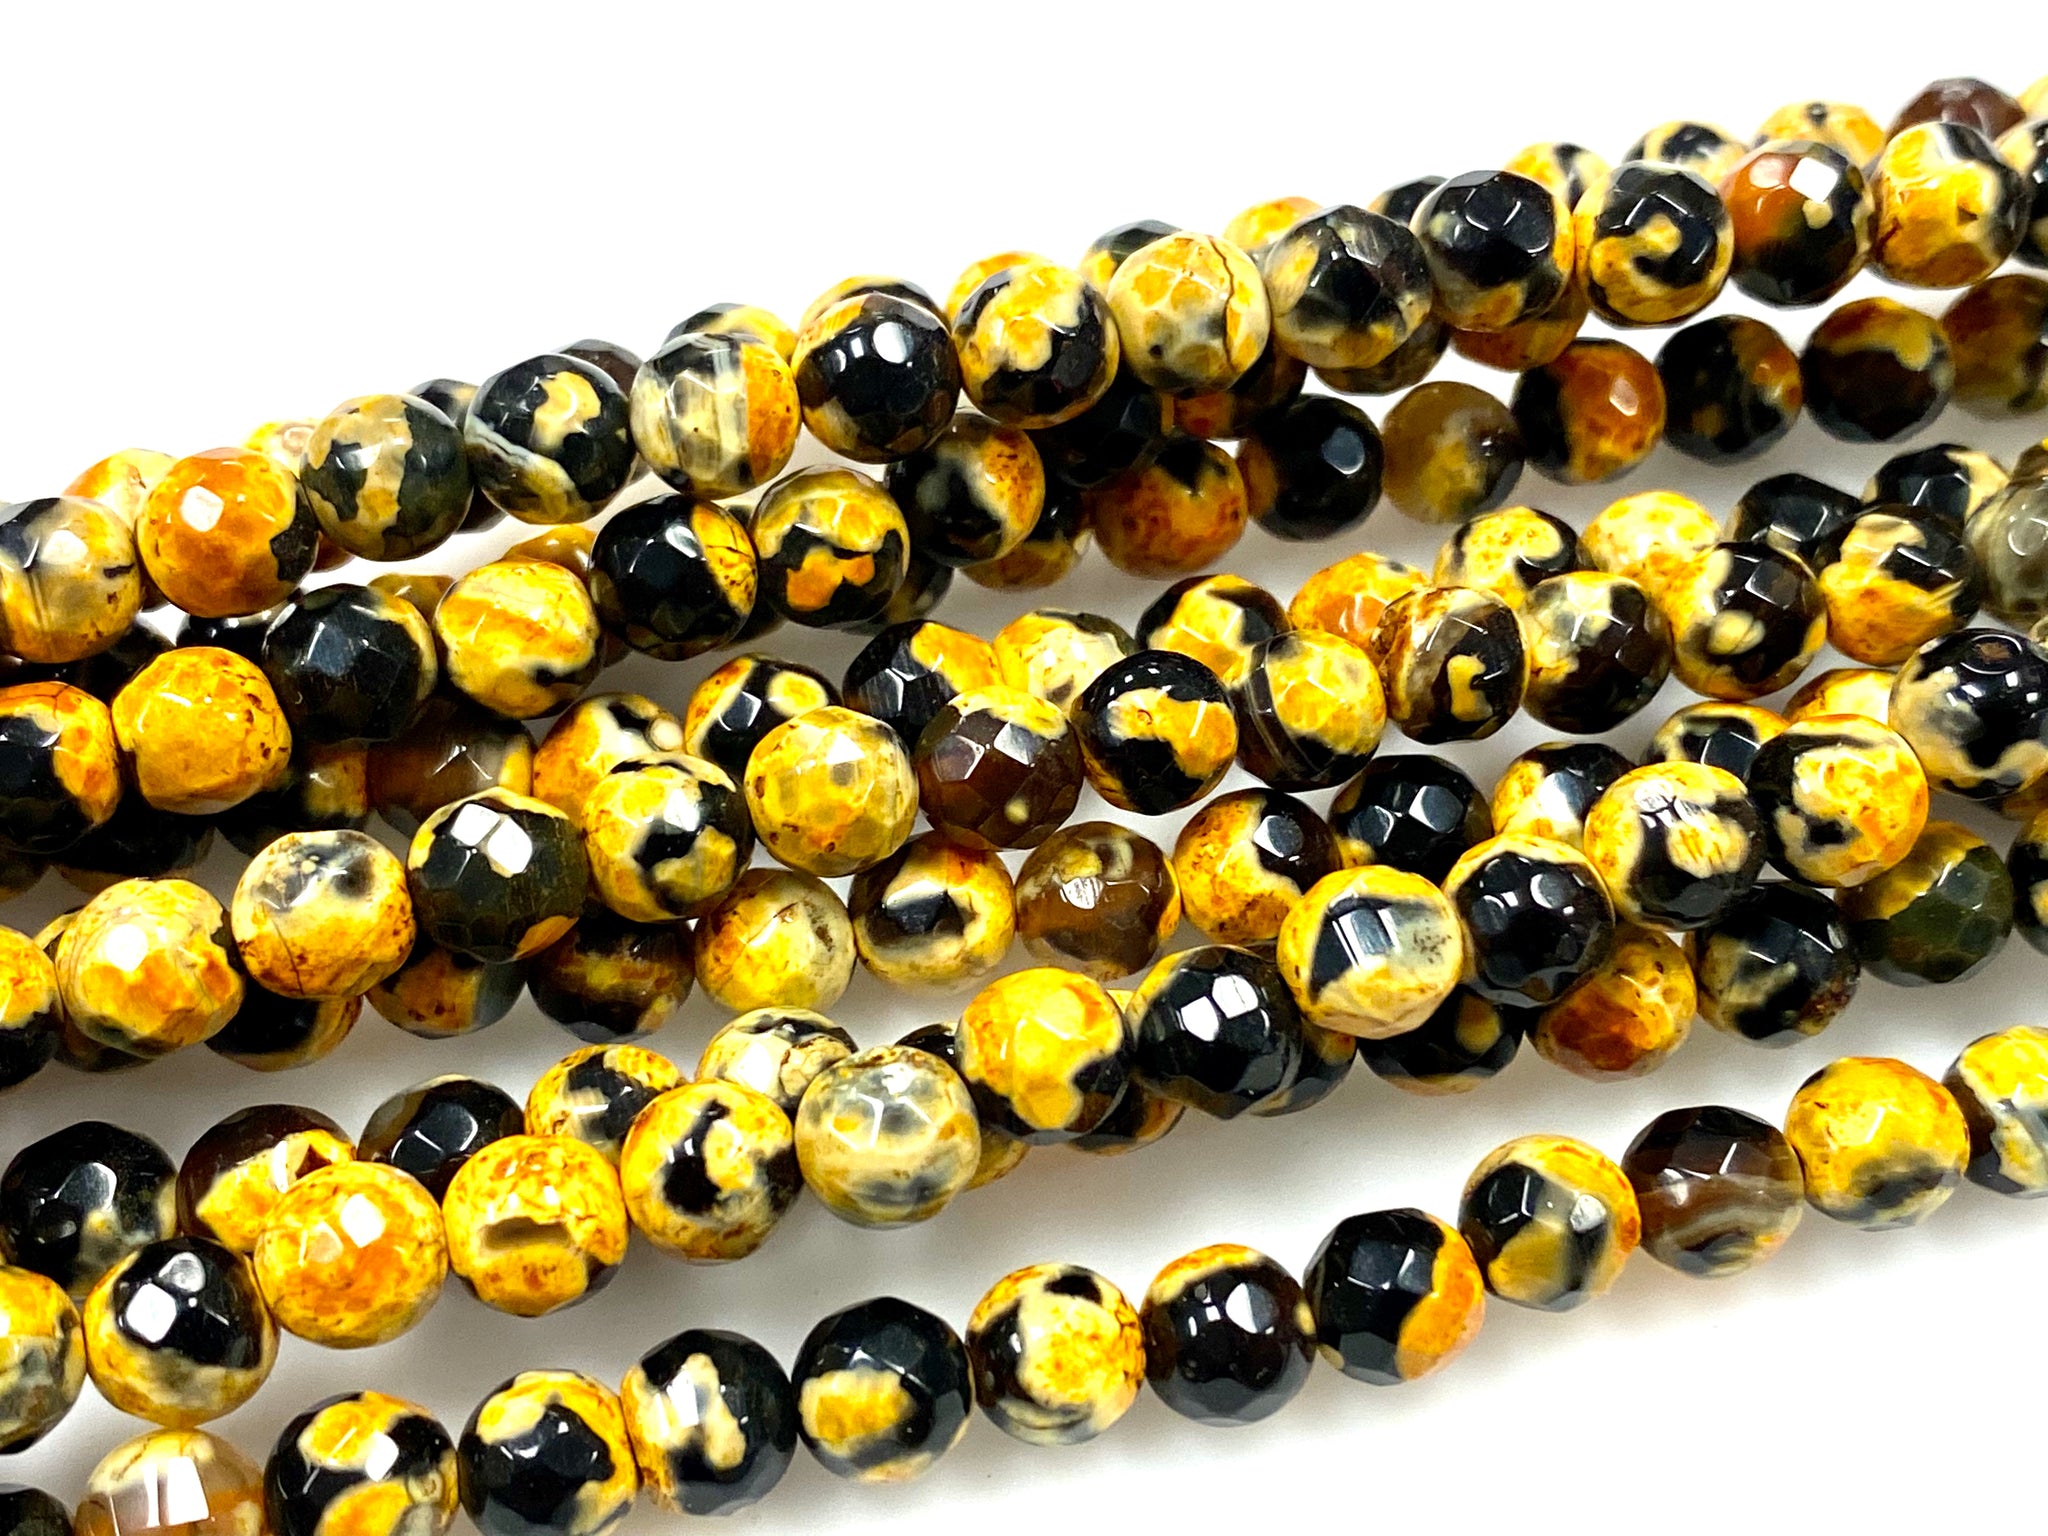 Natural Yellow Agate Beads / Faceted Round Shape Beads / Healing Energy Stone Beads / 6mm 2 Strand Gemstone Beads